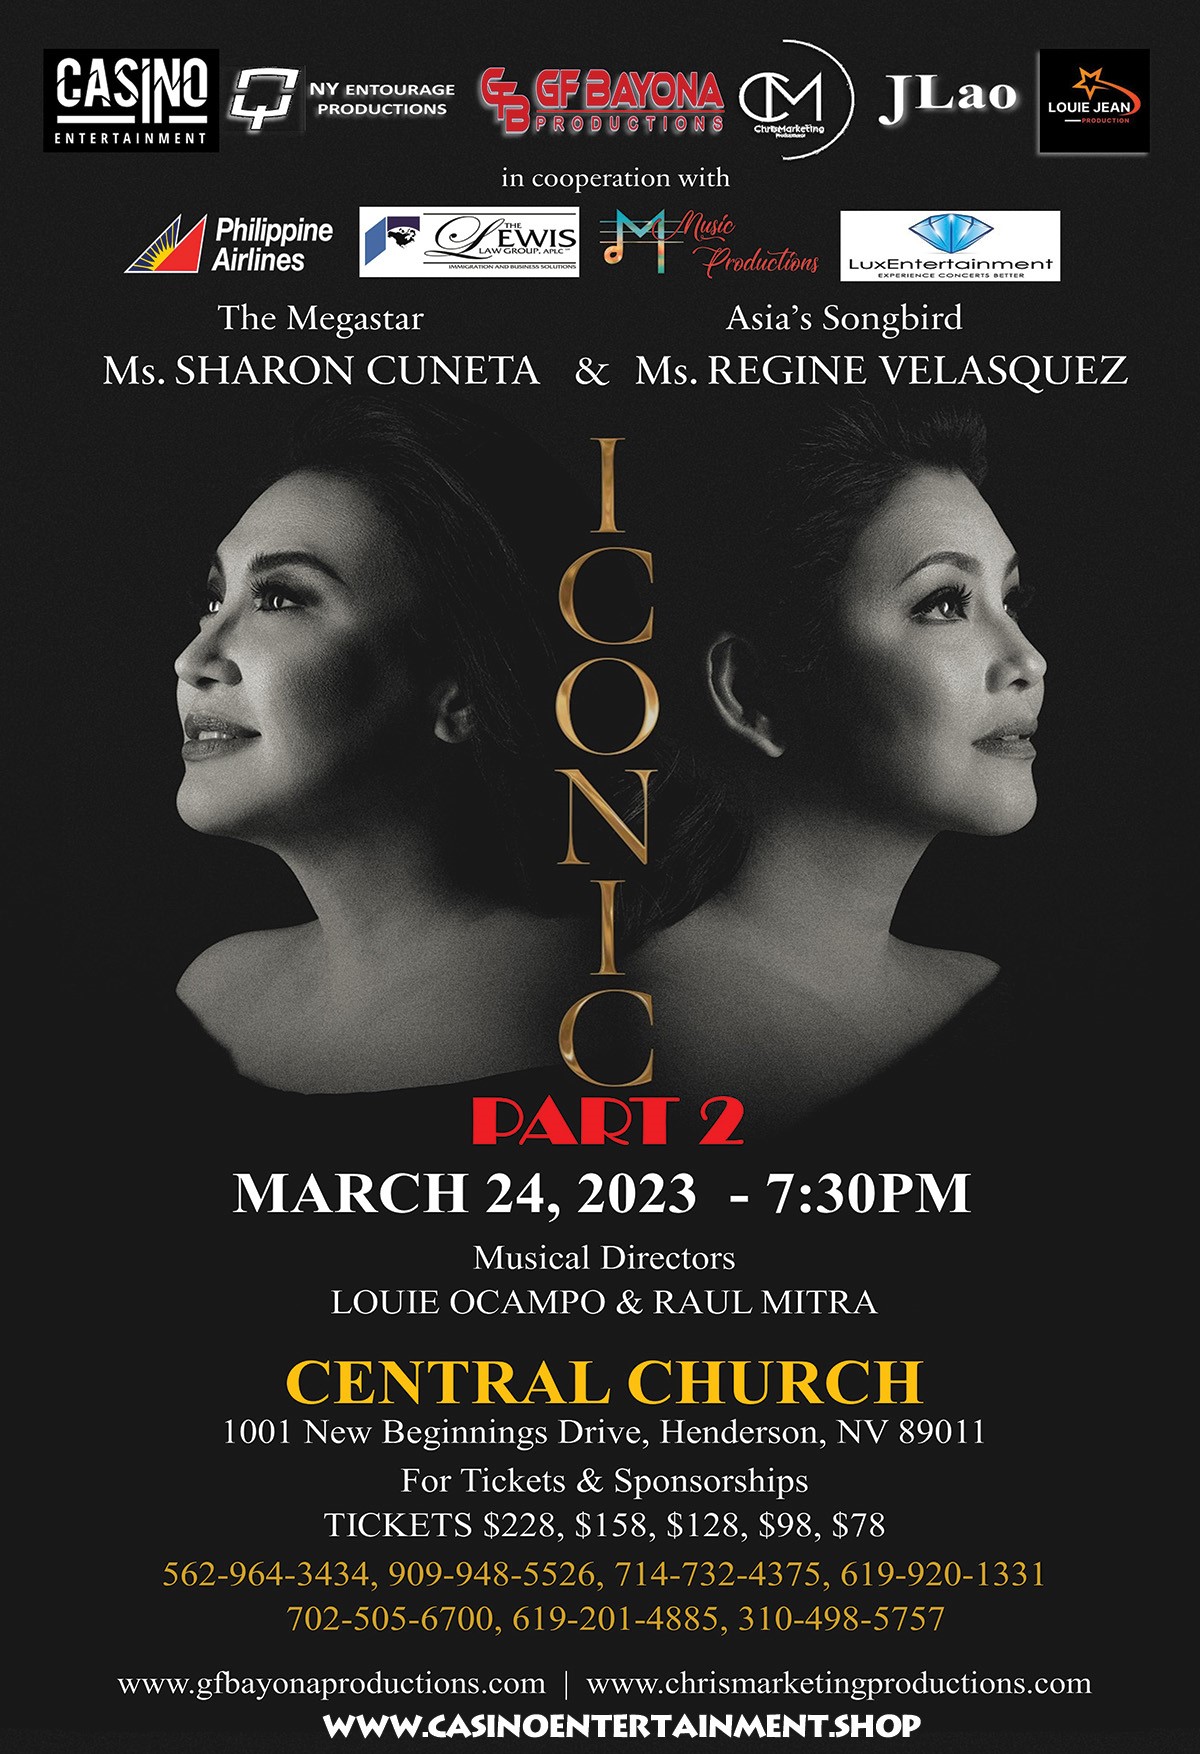 ICONIC PART 2 IN VEGAS  on Mar 24, 19:30@Central Church - Pick a seat, Buy tickets and Get information on www.casinoentertainment.shop casinoentertainment